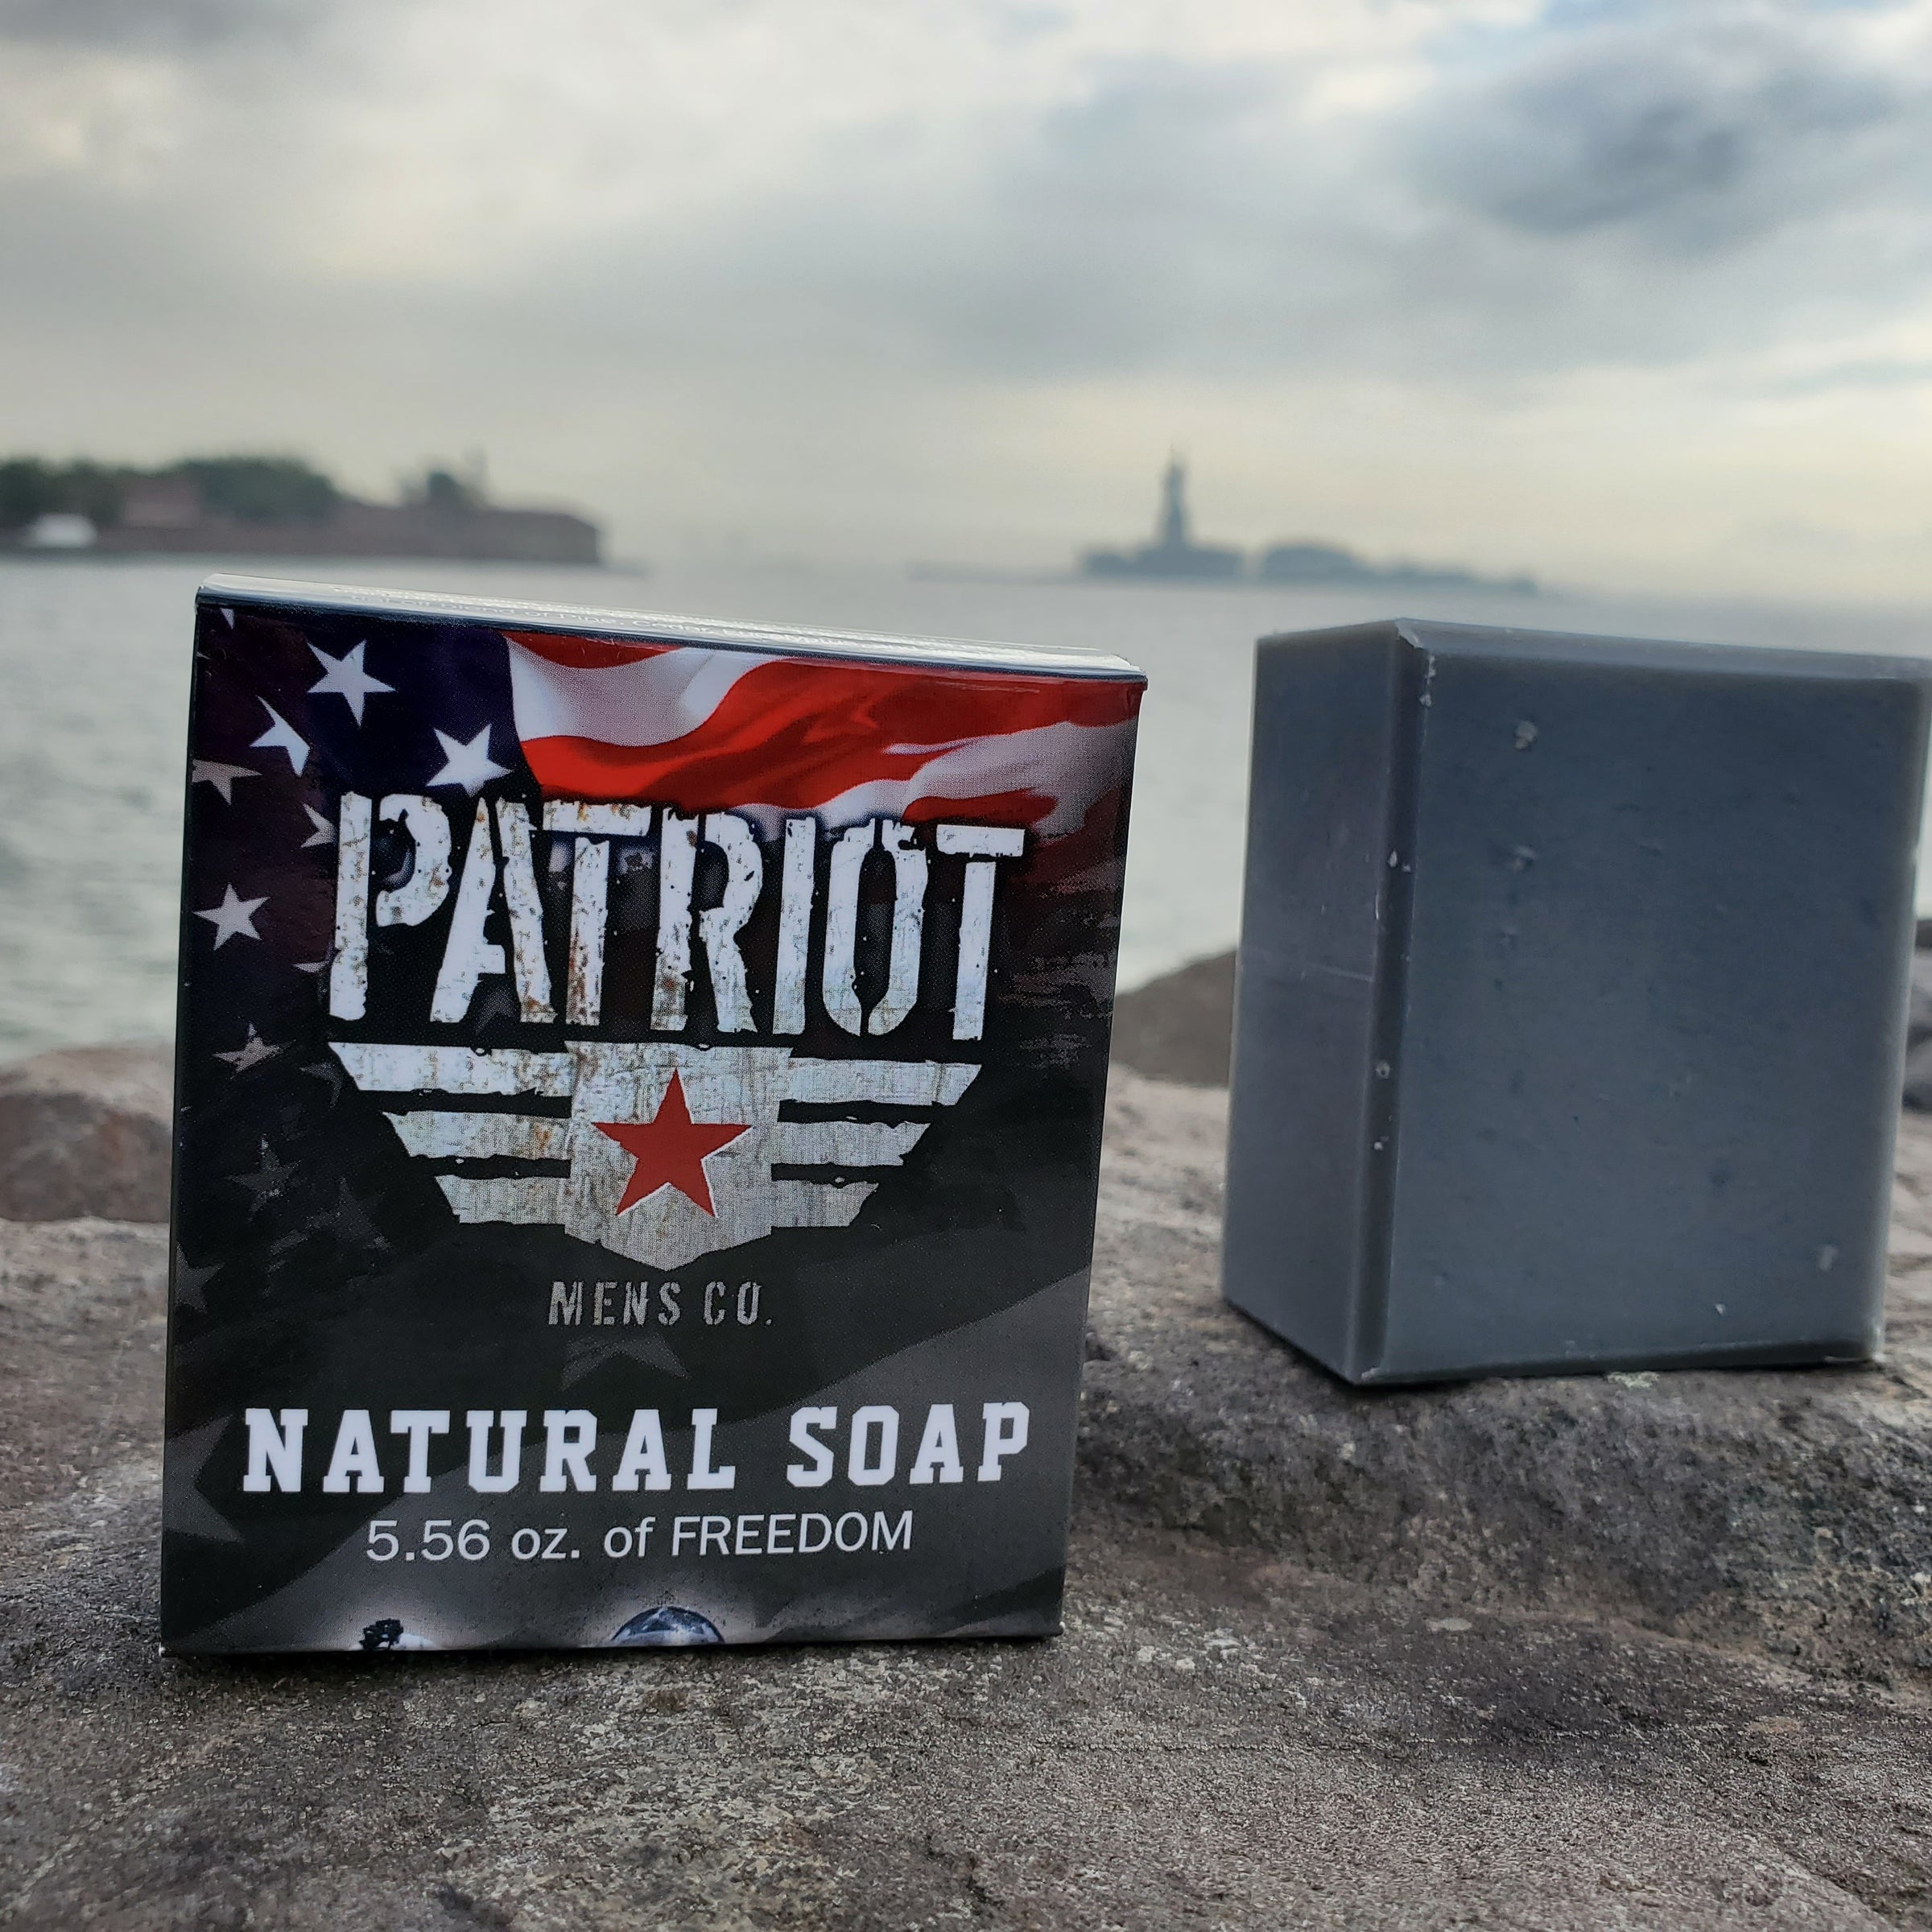 Down Range natural men's soap, smell's like gunpowder, by Patriot and Company activated charcoal soap in New York City with bar of soap and box with statue of liberty in background.